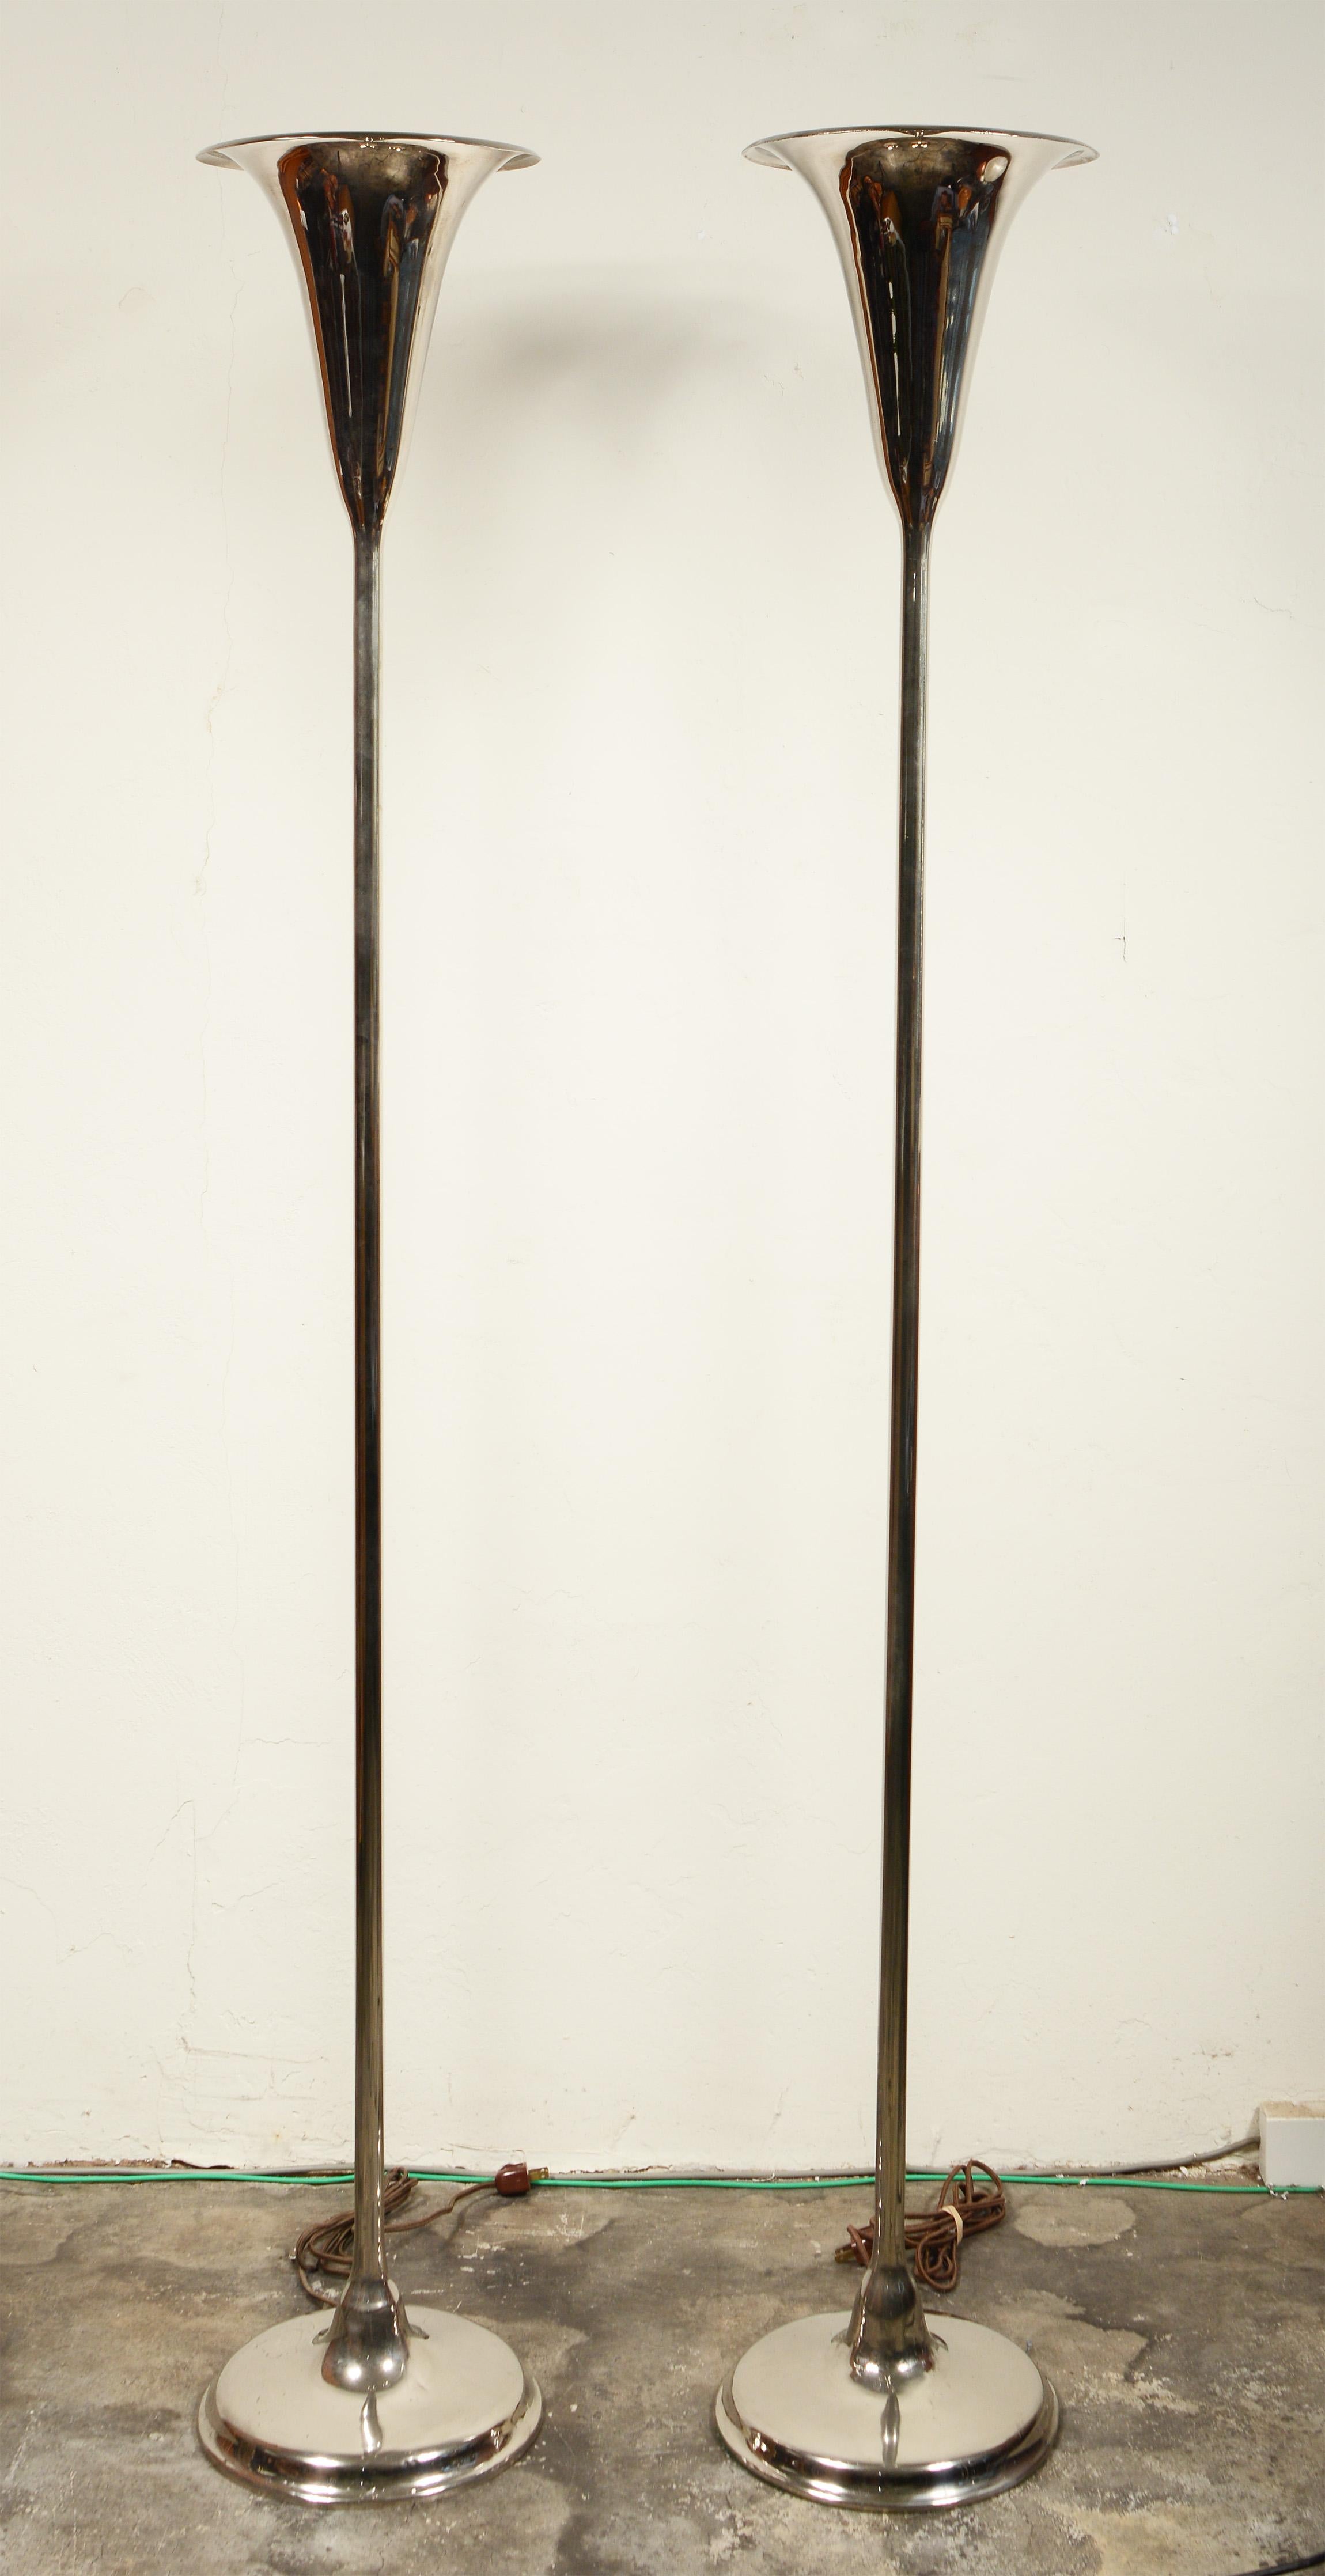 Pair of slender Moderne Art Deco torchieres. These are polished nickel plate. The shade, base and center pole are brazed together so the lamp is one piece top to bottom. There are some small dings to the bases. One base has a small oxidized spot.